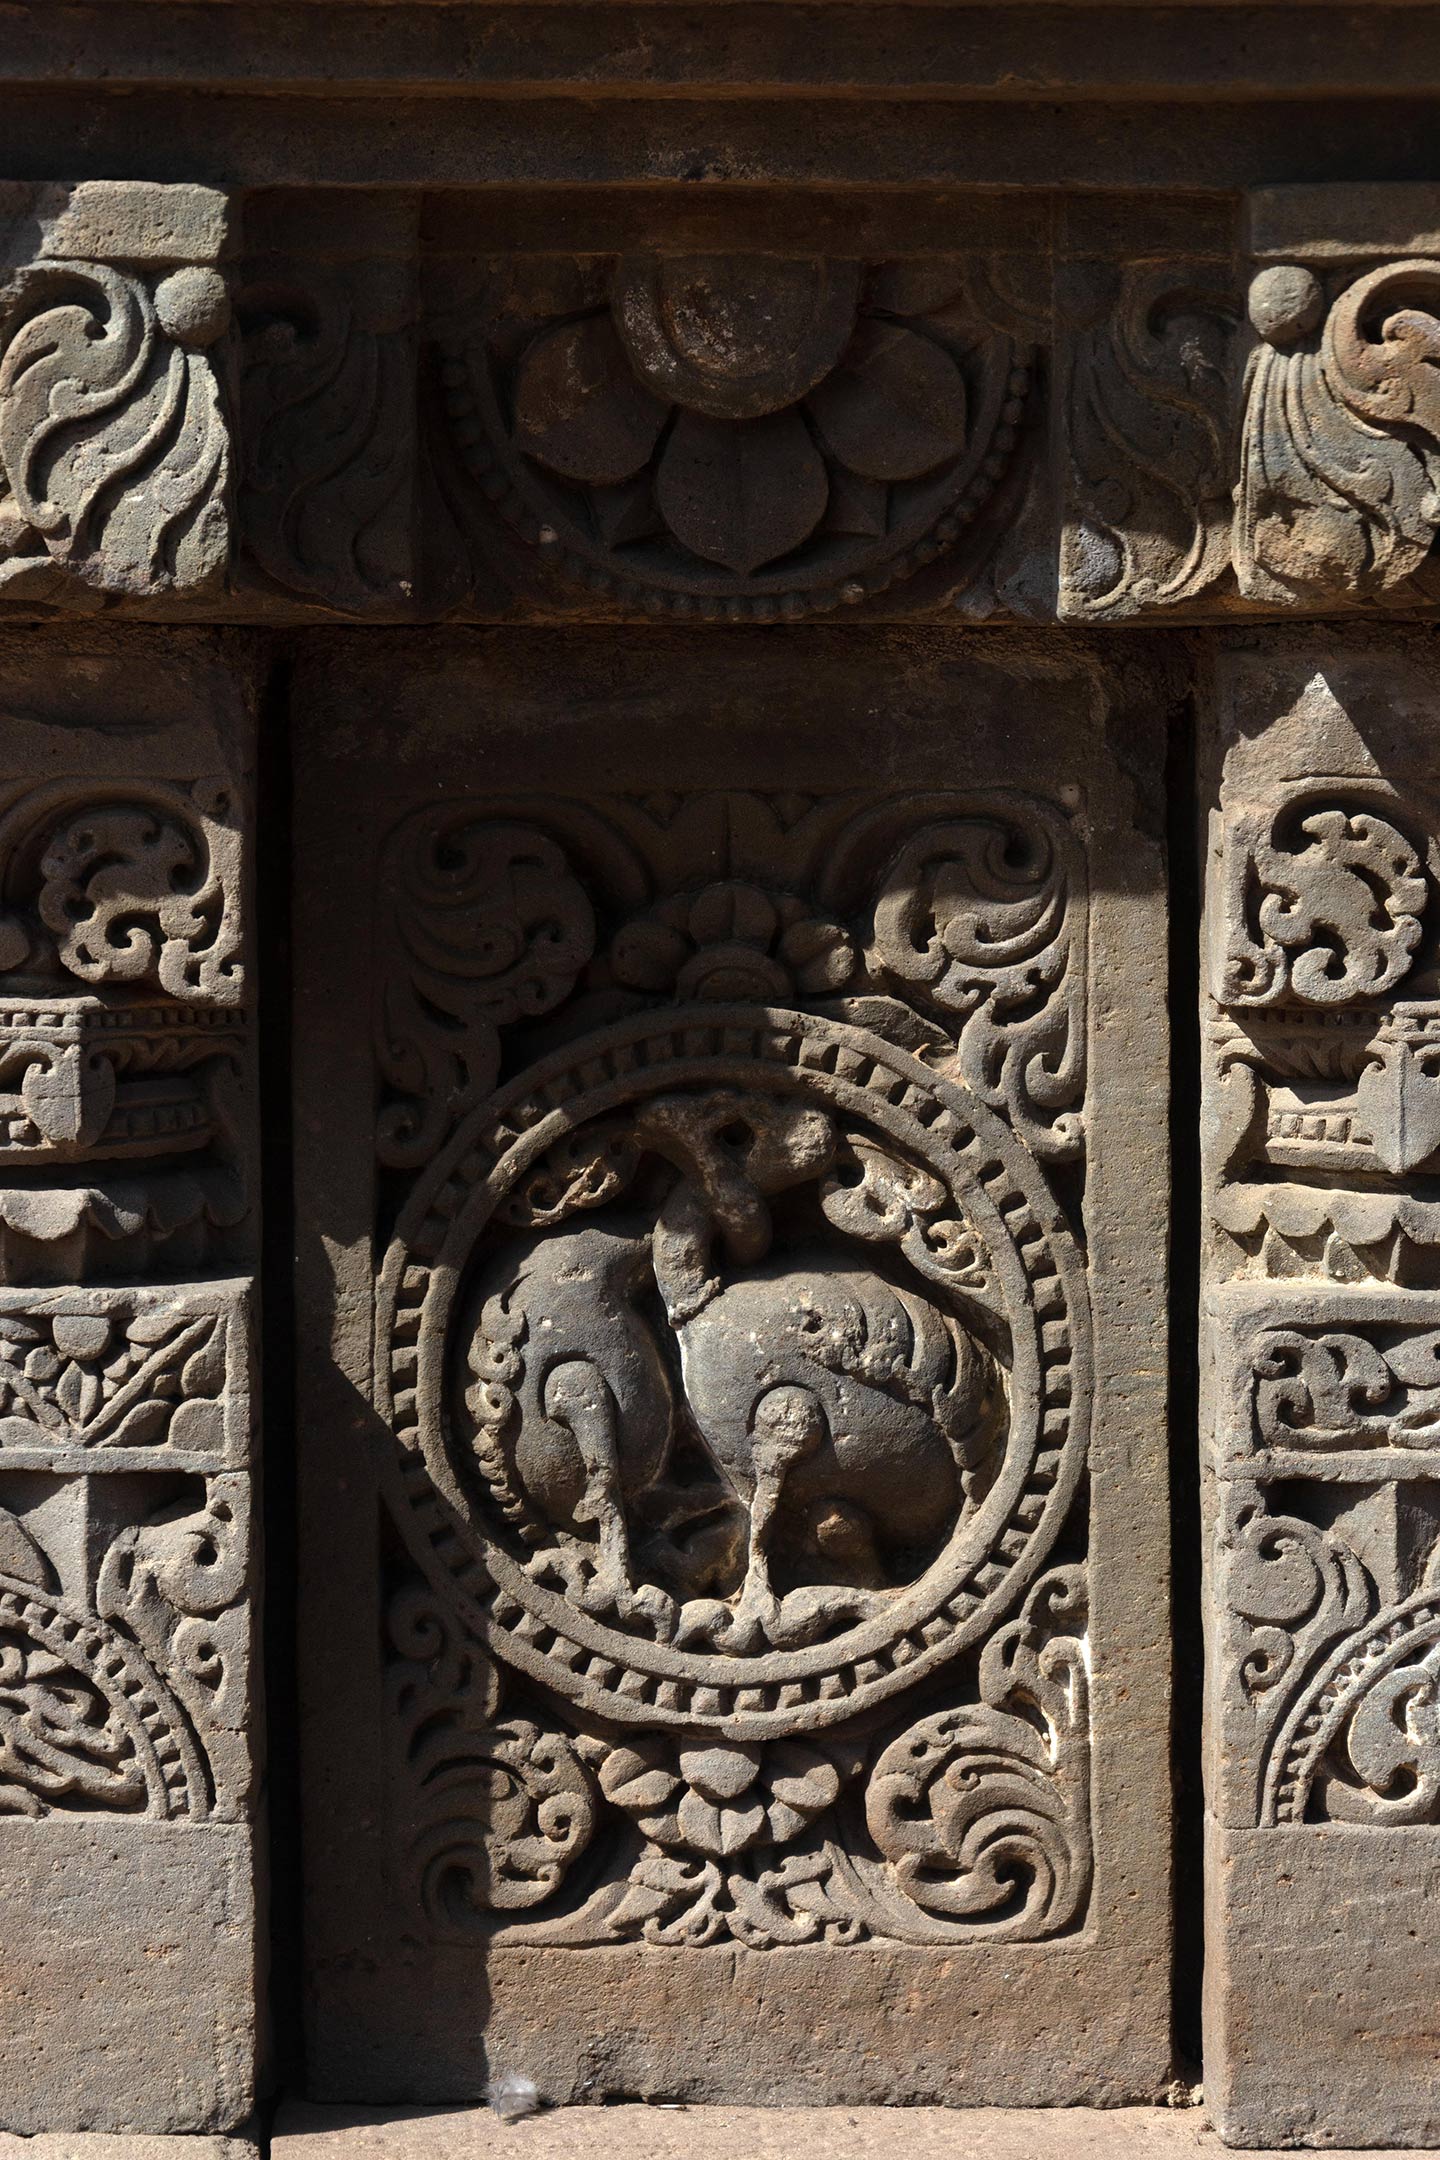 This plaque features two birds, likely hamsas (swans), with their necks entwined. The plaques are separated by squat pillars which have a square base, an octagonal shaft, and a square capital. The pillars are decorated with ardha padma (half lotus) and kalpa lata (creeper) motifs.